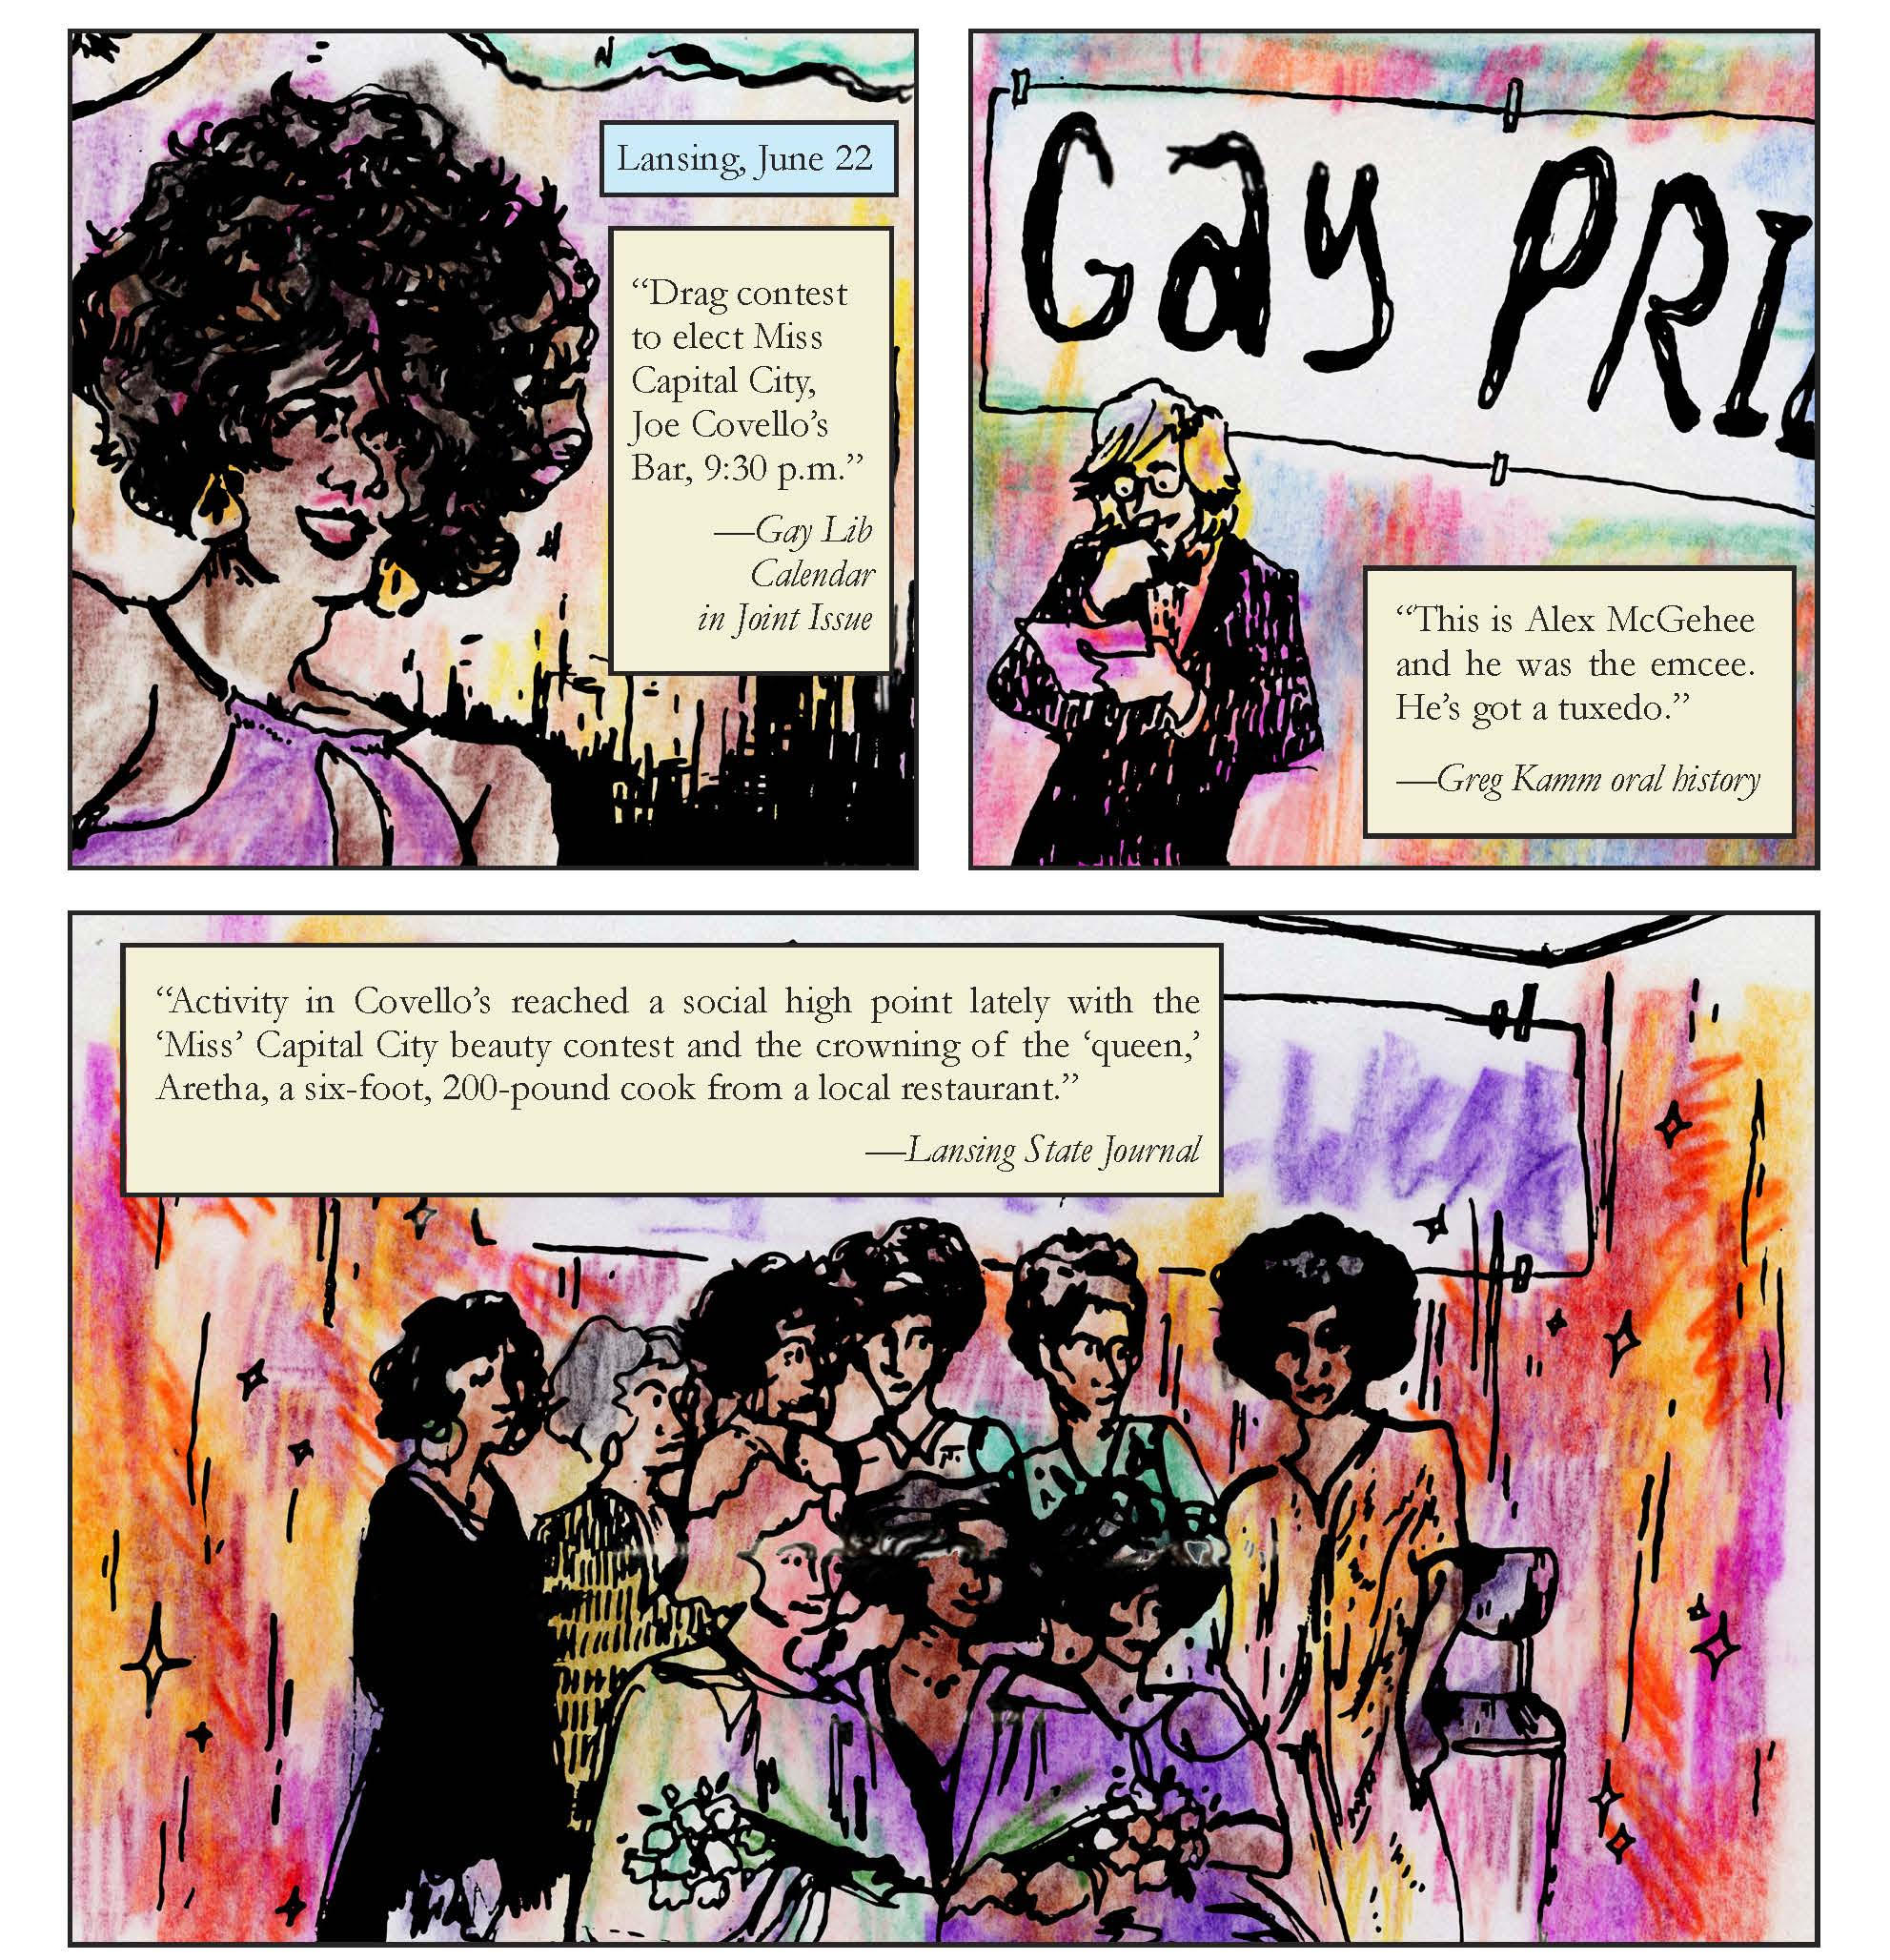 A page from Come Out! In Detroit with 3 panels. The first, labeled “Lansing, June 22” features a black woman with an afro and a purple dress with the text: “Drag contest to elect Miss Capital City, Joe Covello’s Bar, 9:30 p.m.” (Gay Lib Calendar in Joint Issue). The second shows a man with shoulder length blond hair in a tuxedo, and a sign behind him says “Gay Pride.” The text reads: “This is Alex McGehee and he was the emcee. He’s got a tuxedo” (Greg Kamm oral history). The third shows nine women in dresses, two of whom have flower bouquets. The text reads: “Activity in Covello’s reached a social high point lately with the ‘Miss’ Capital City beauty contest and the crowning of the ‘queen’, Aretha, a six-foot, 200-pound cook from a local restaurant” (Lansing State Journal).